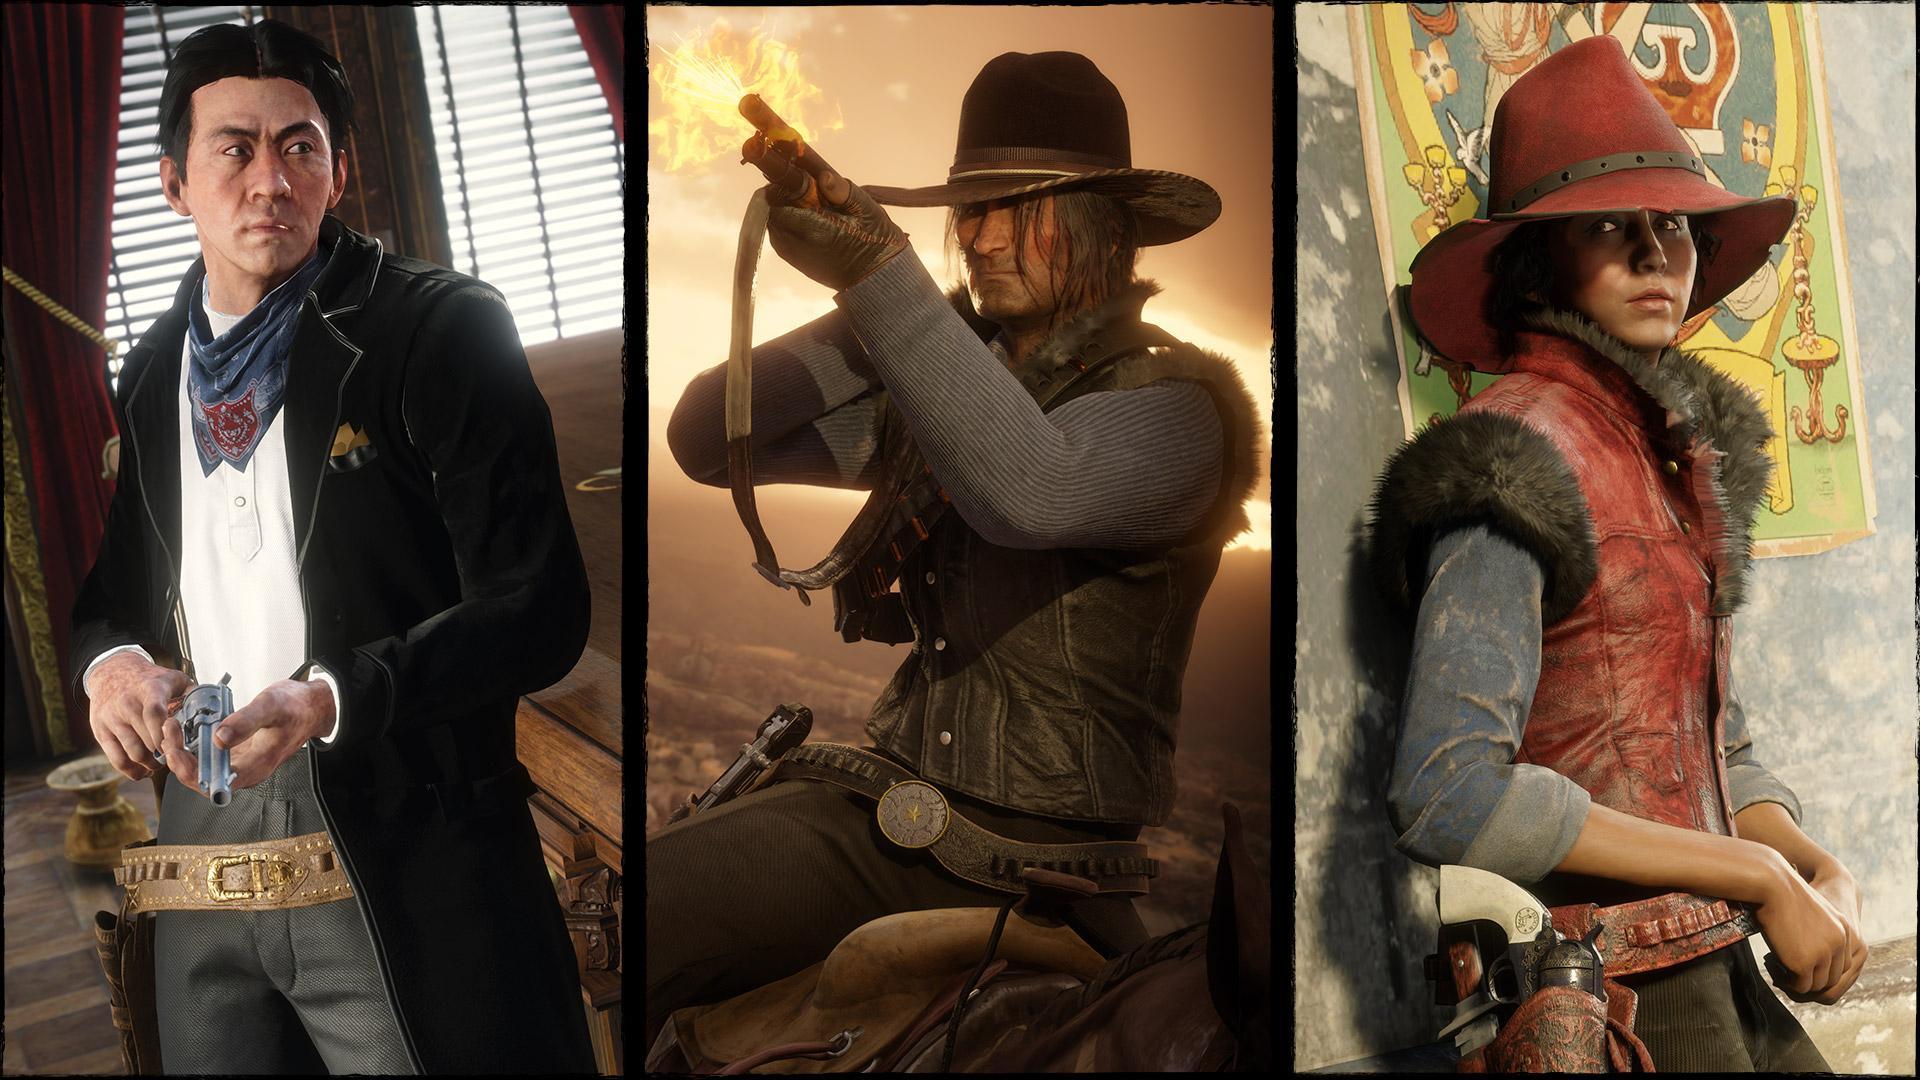 where do you buy clothes in red dead redemption 2